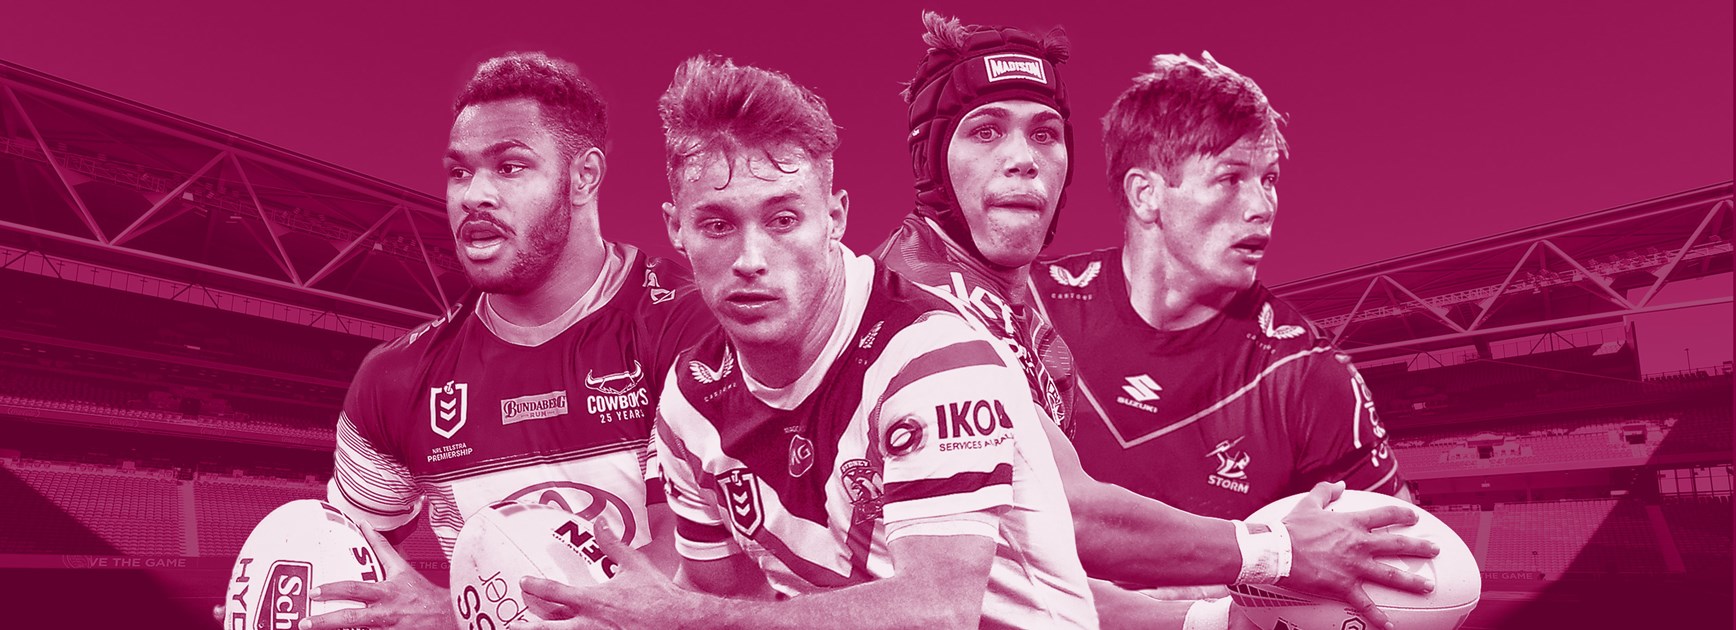 NRL 2021: State of Origin, Queensland Maroons, young talent has